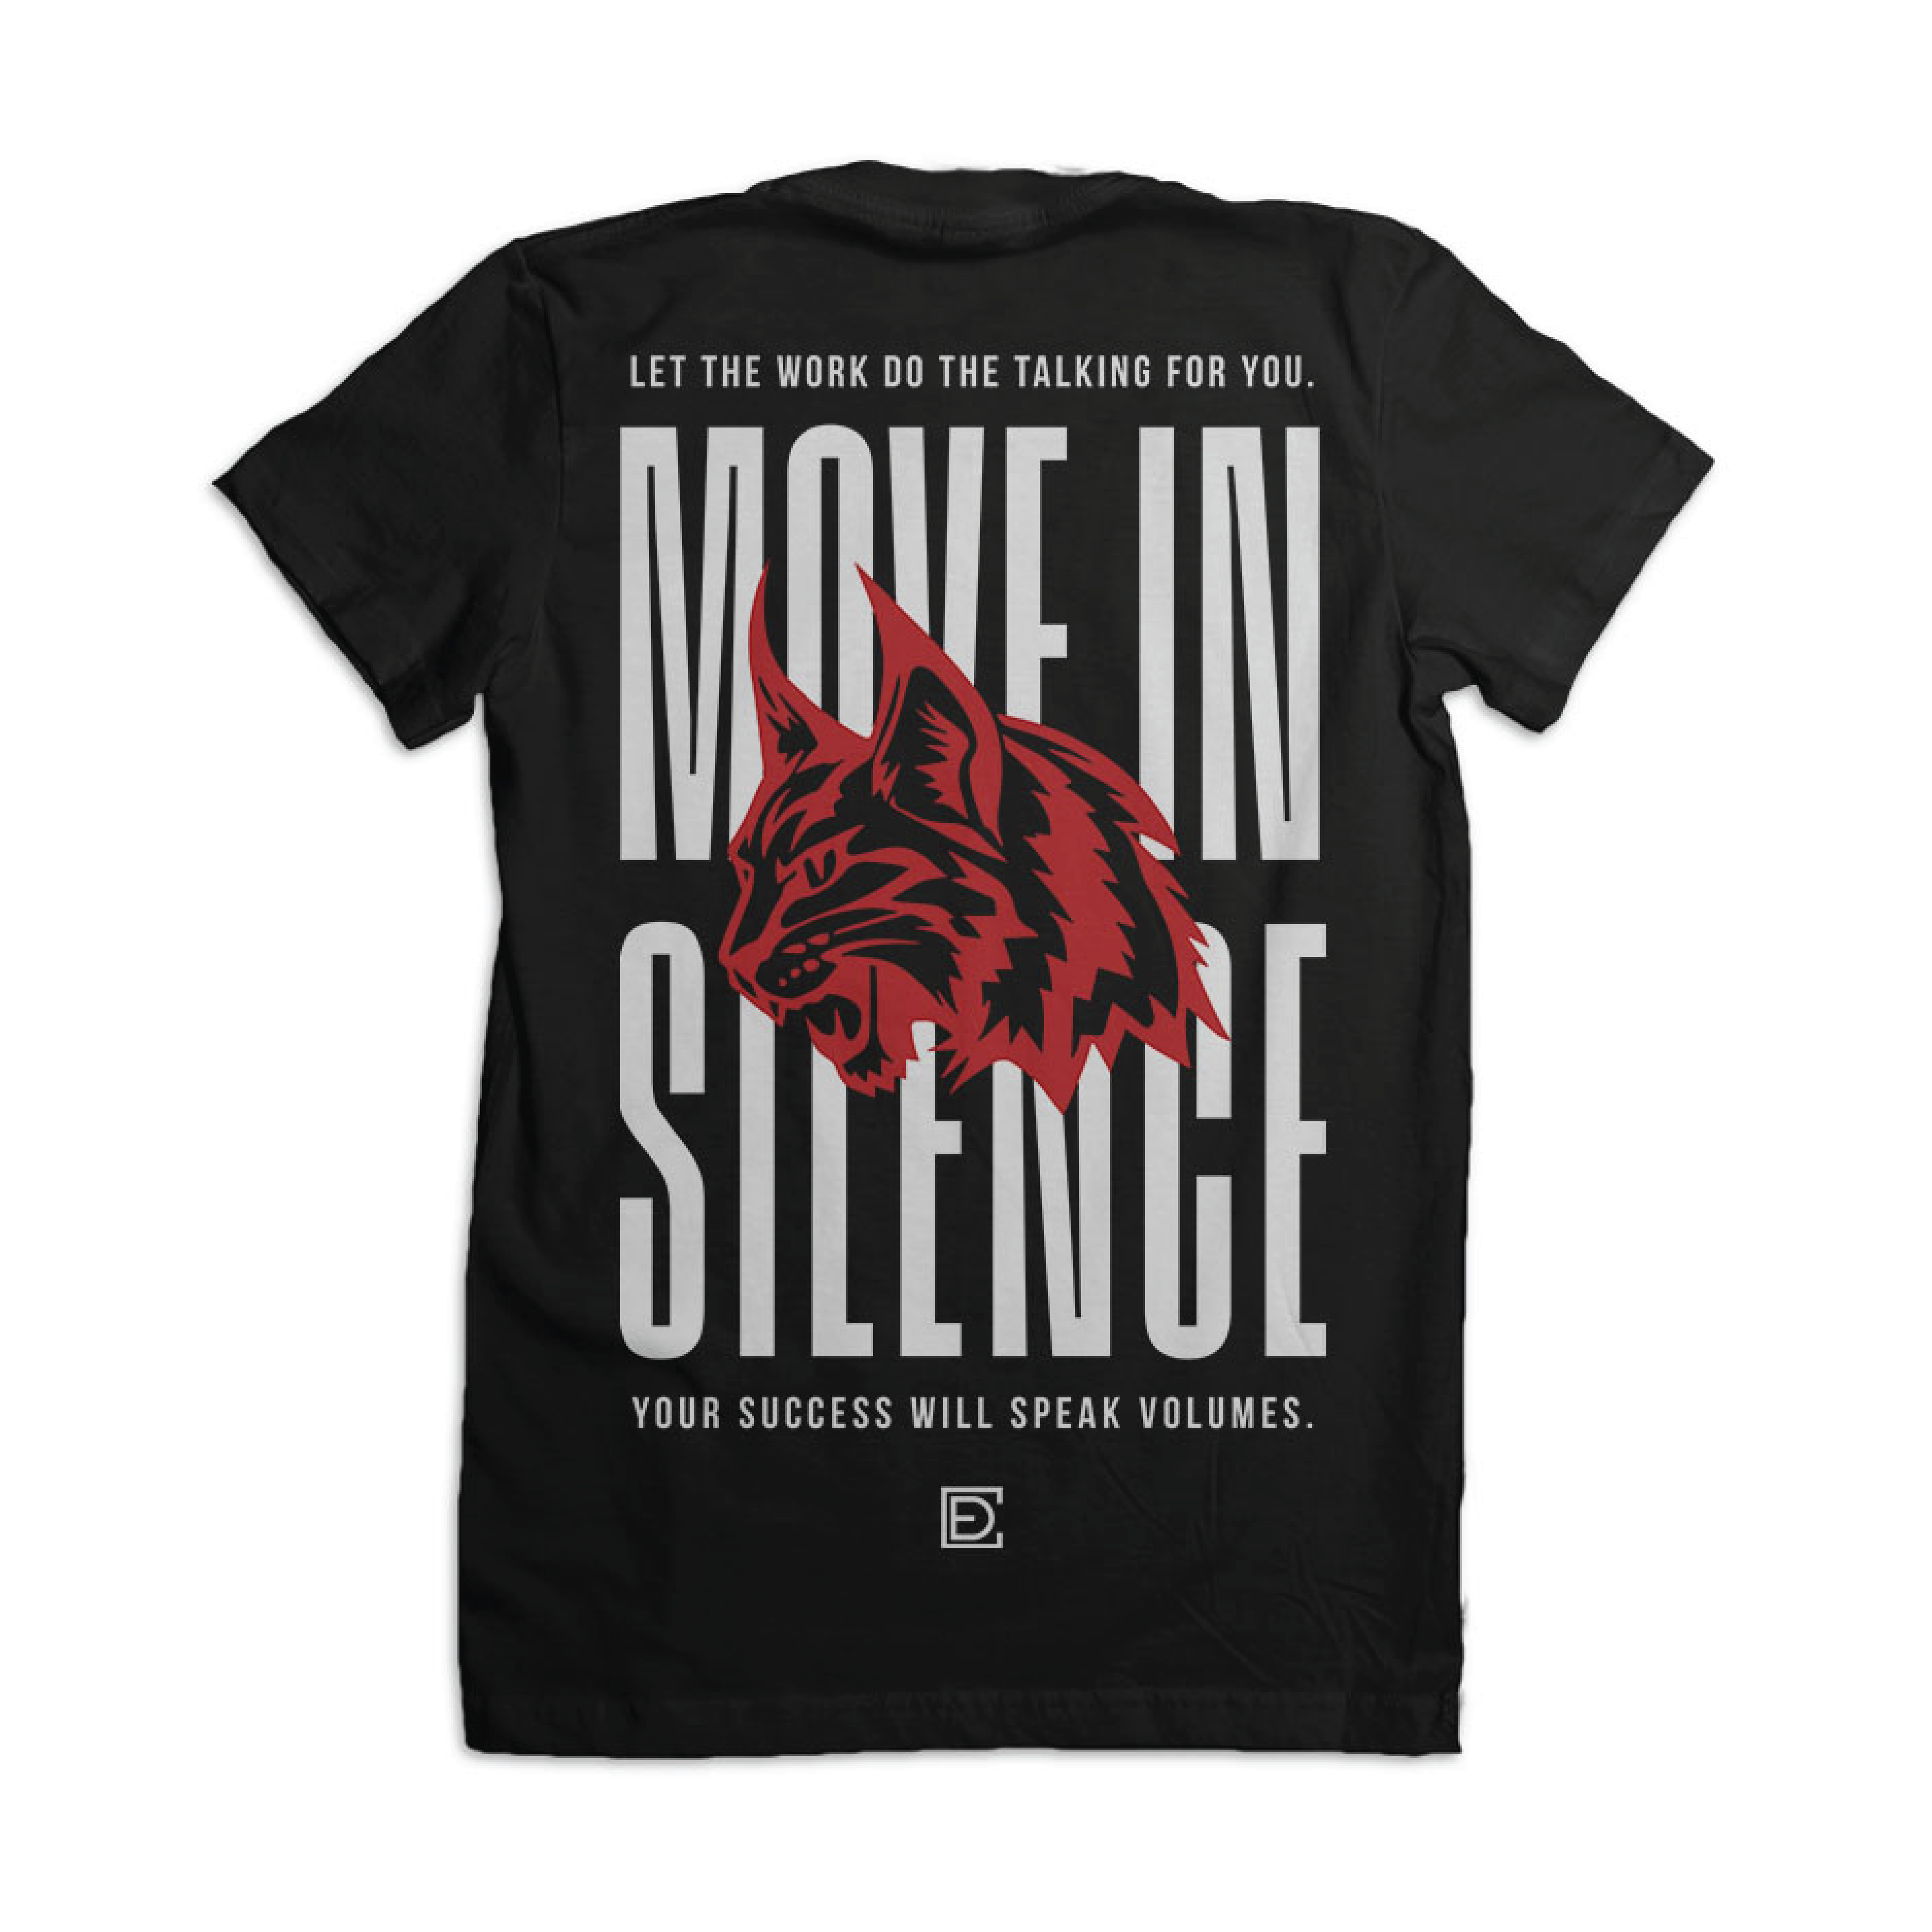 Move in Silence (Women's)